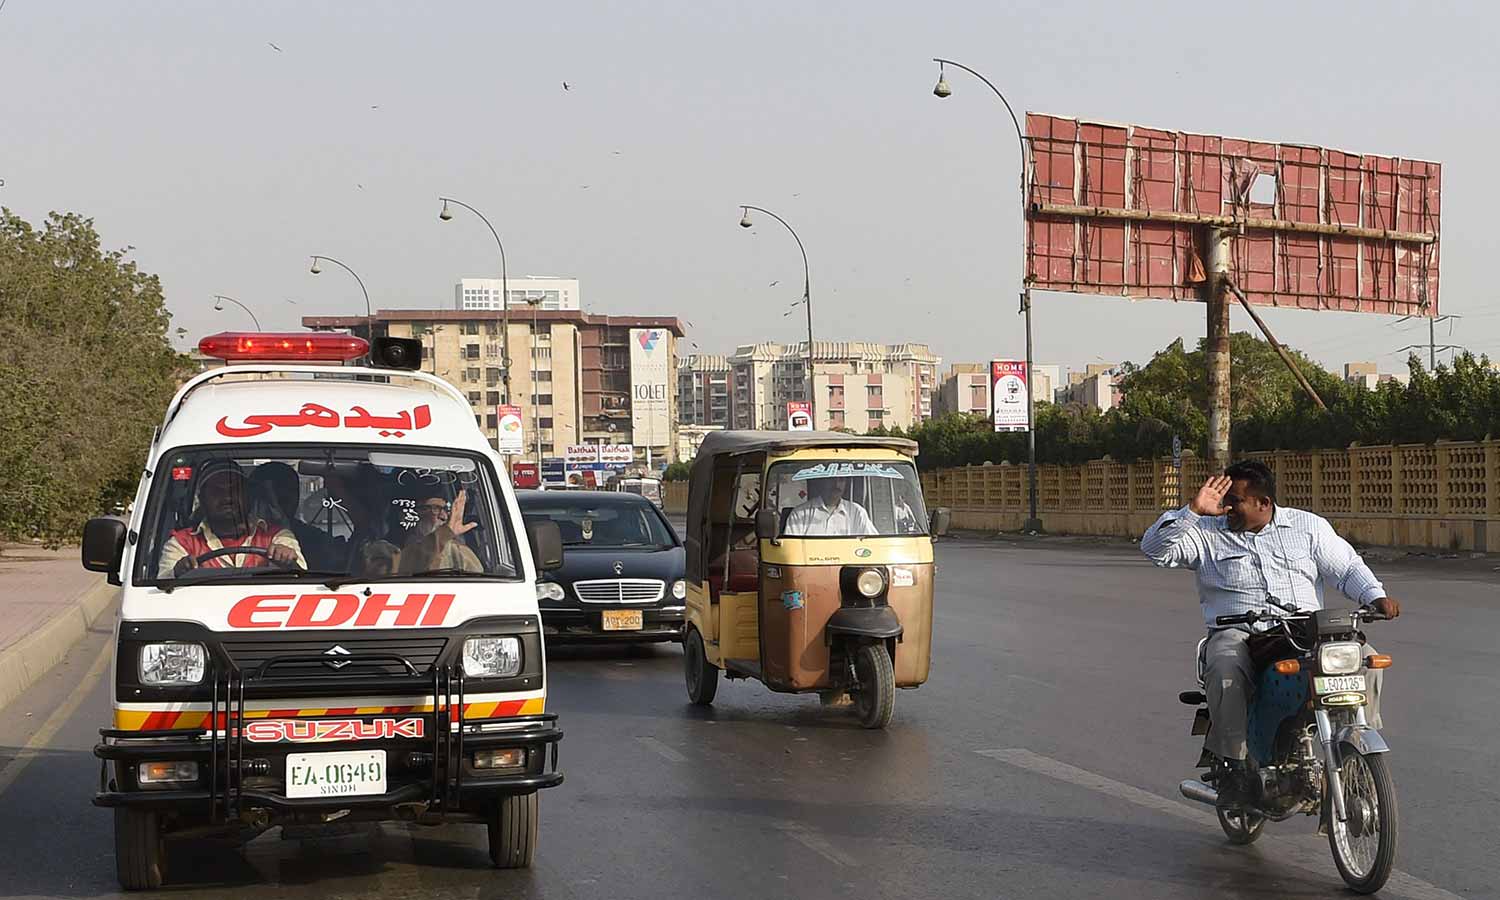 A motorcyclist (R) pays his respects to Abdul Sattar Edhi (2nd L), as he travels to his office in Karachi.